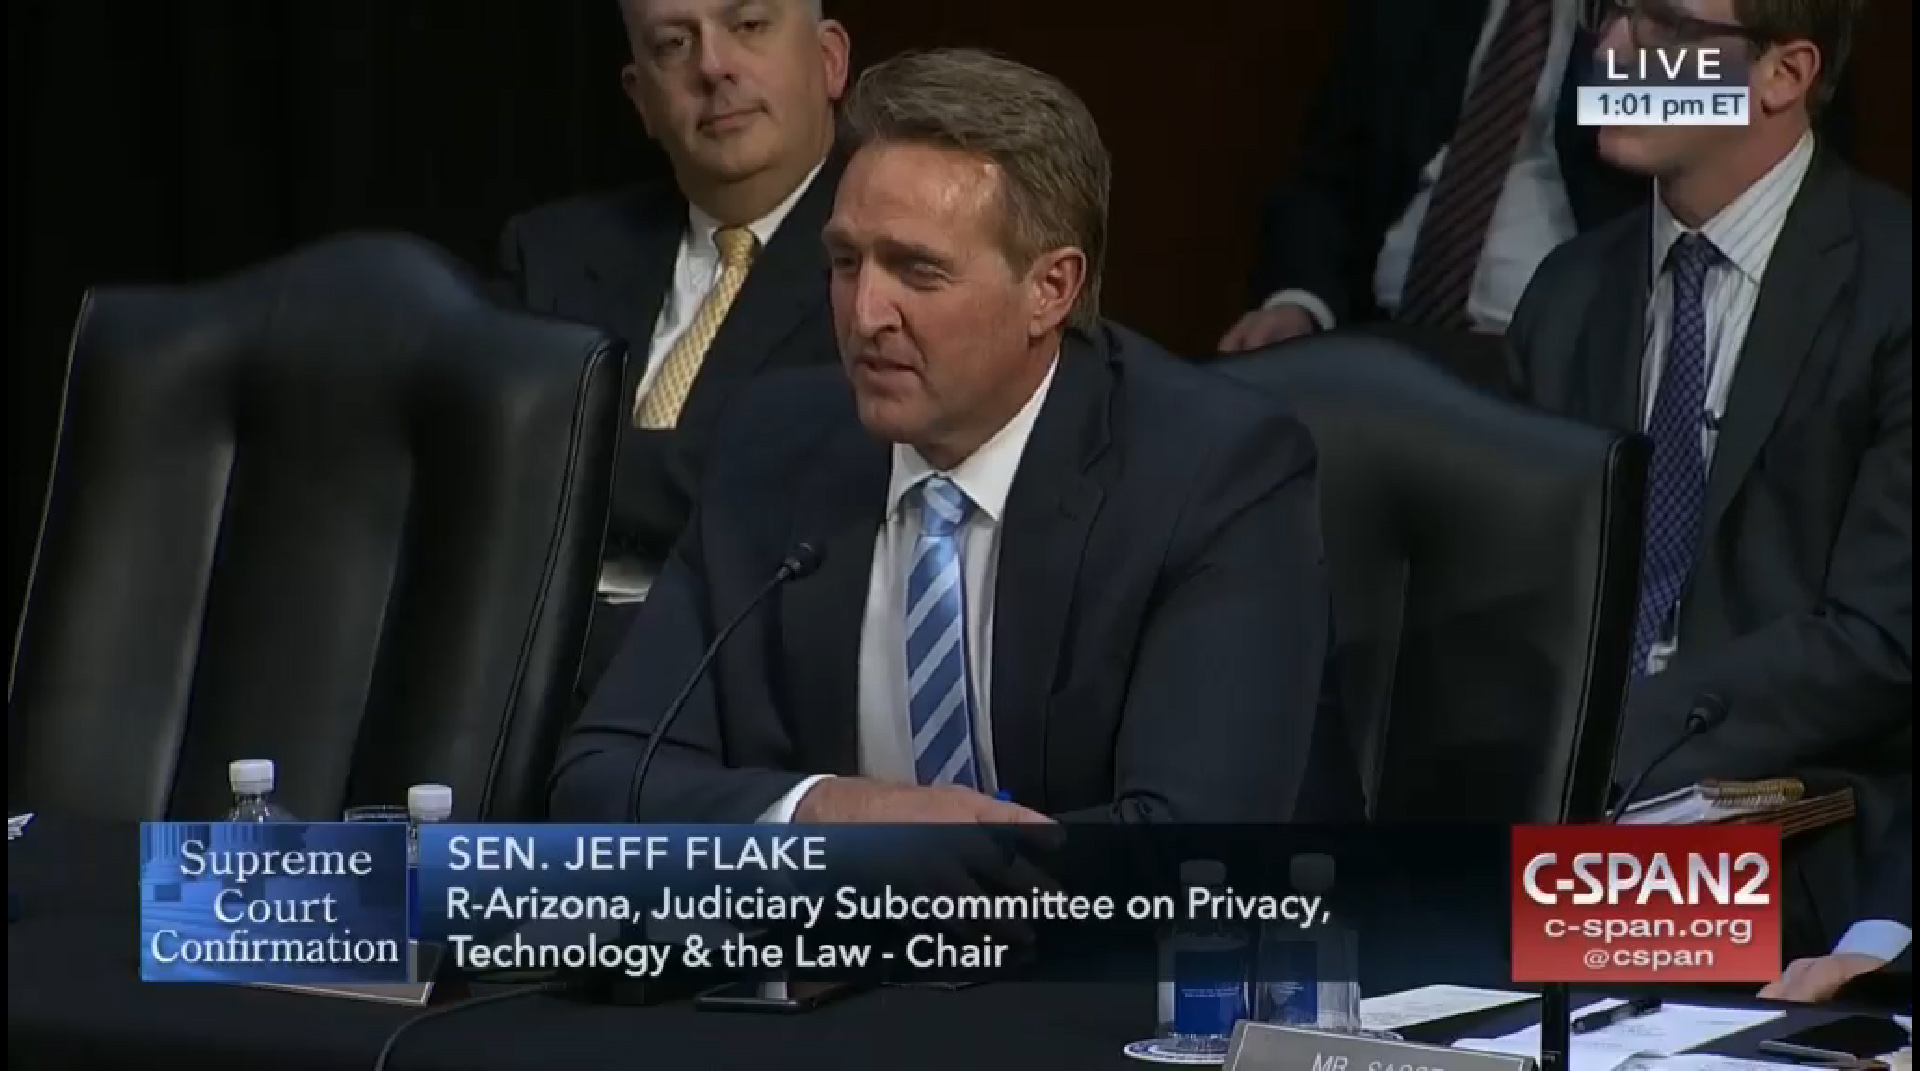 Sen. Jeff Flake, R-Arizona, spoke April 3 before a Senate committee voted to send the Supreme Court nomination of Judge Neil Gorsuch to the Senate floor.